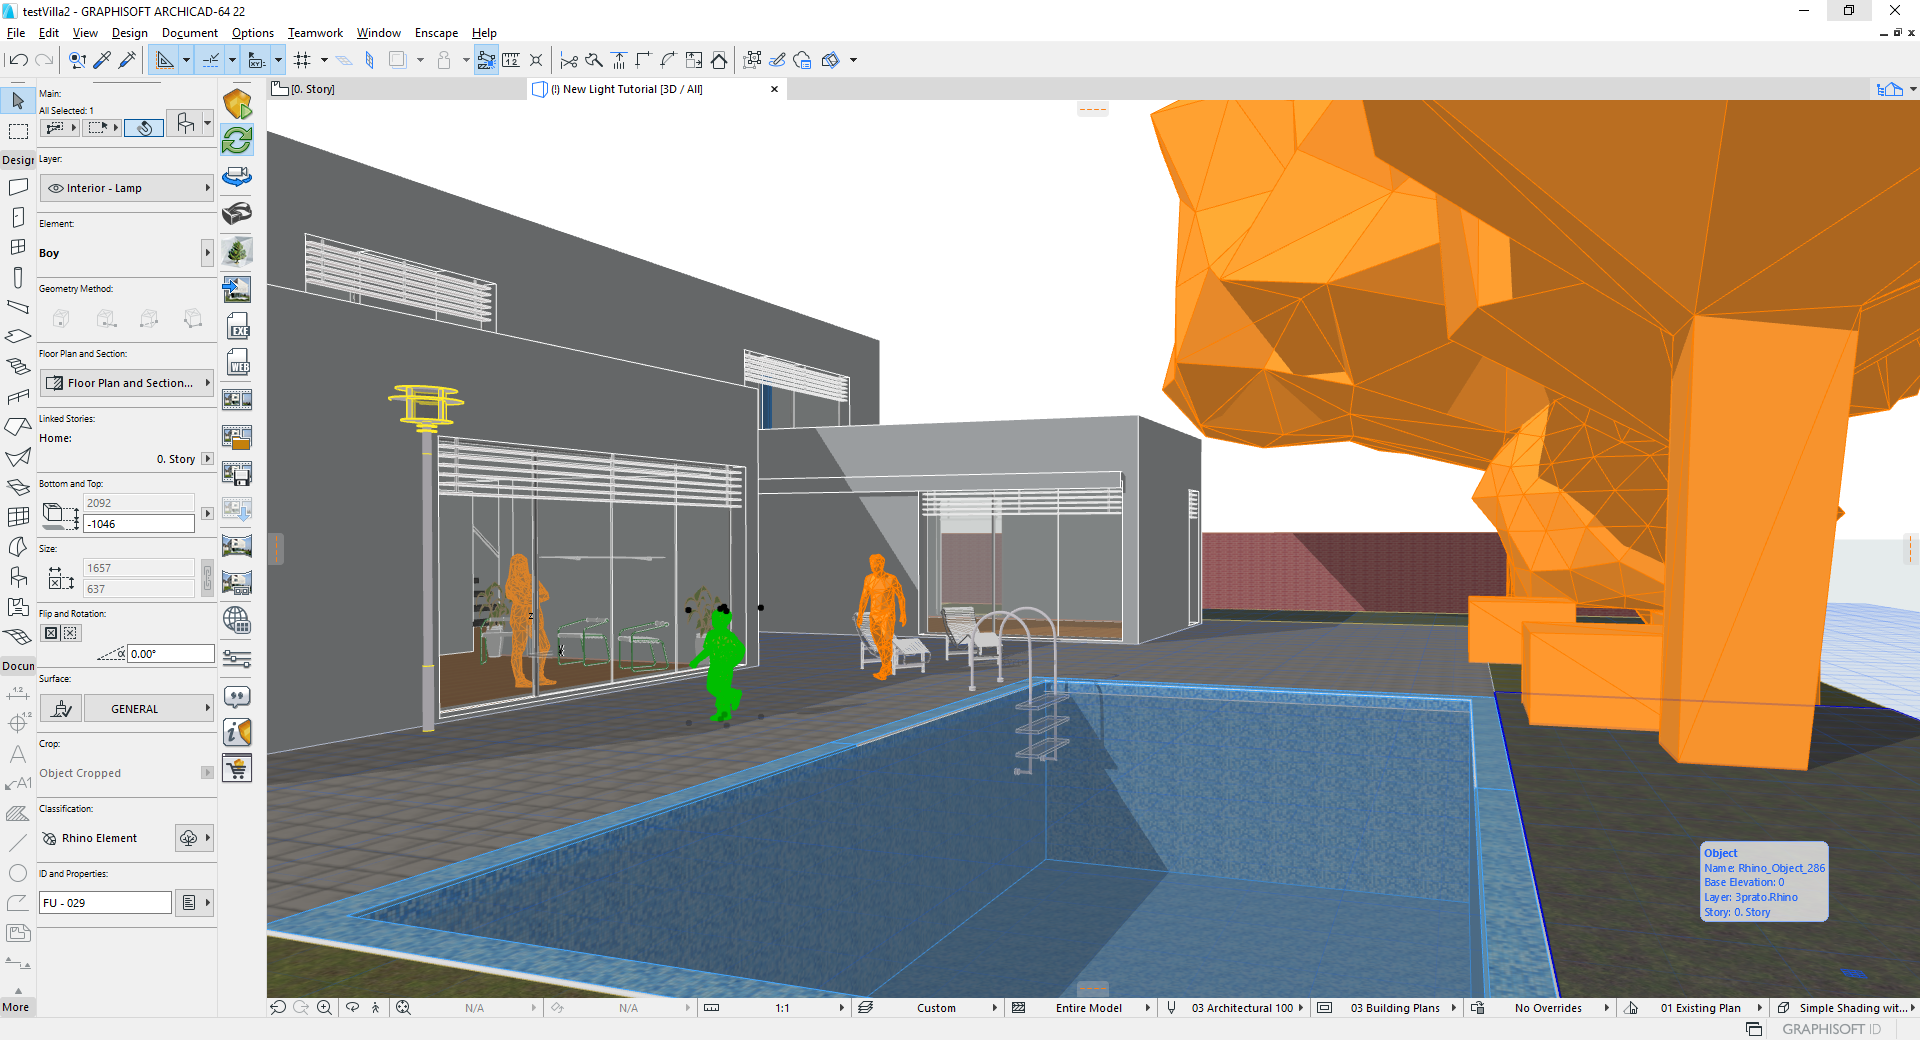 Enscape assets represented in ArchiCAD view